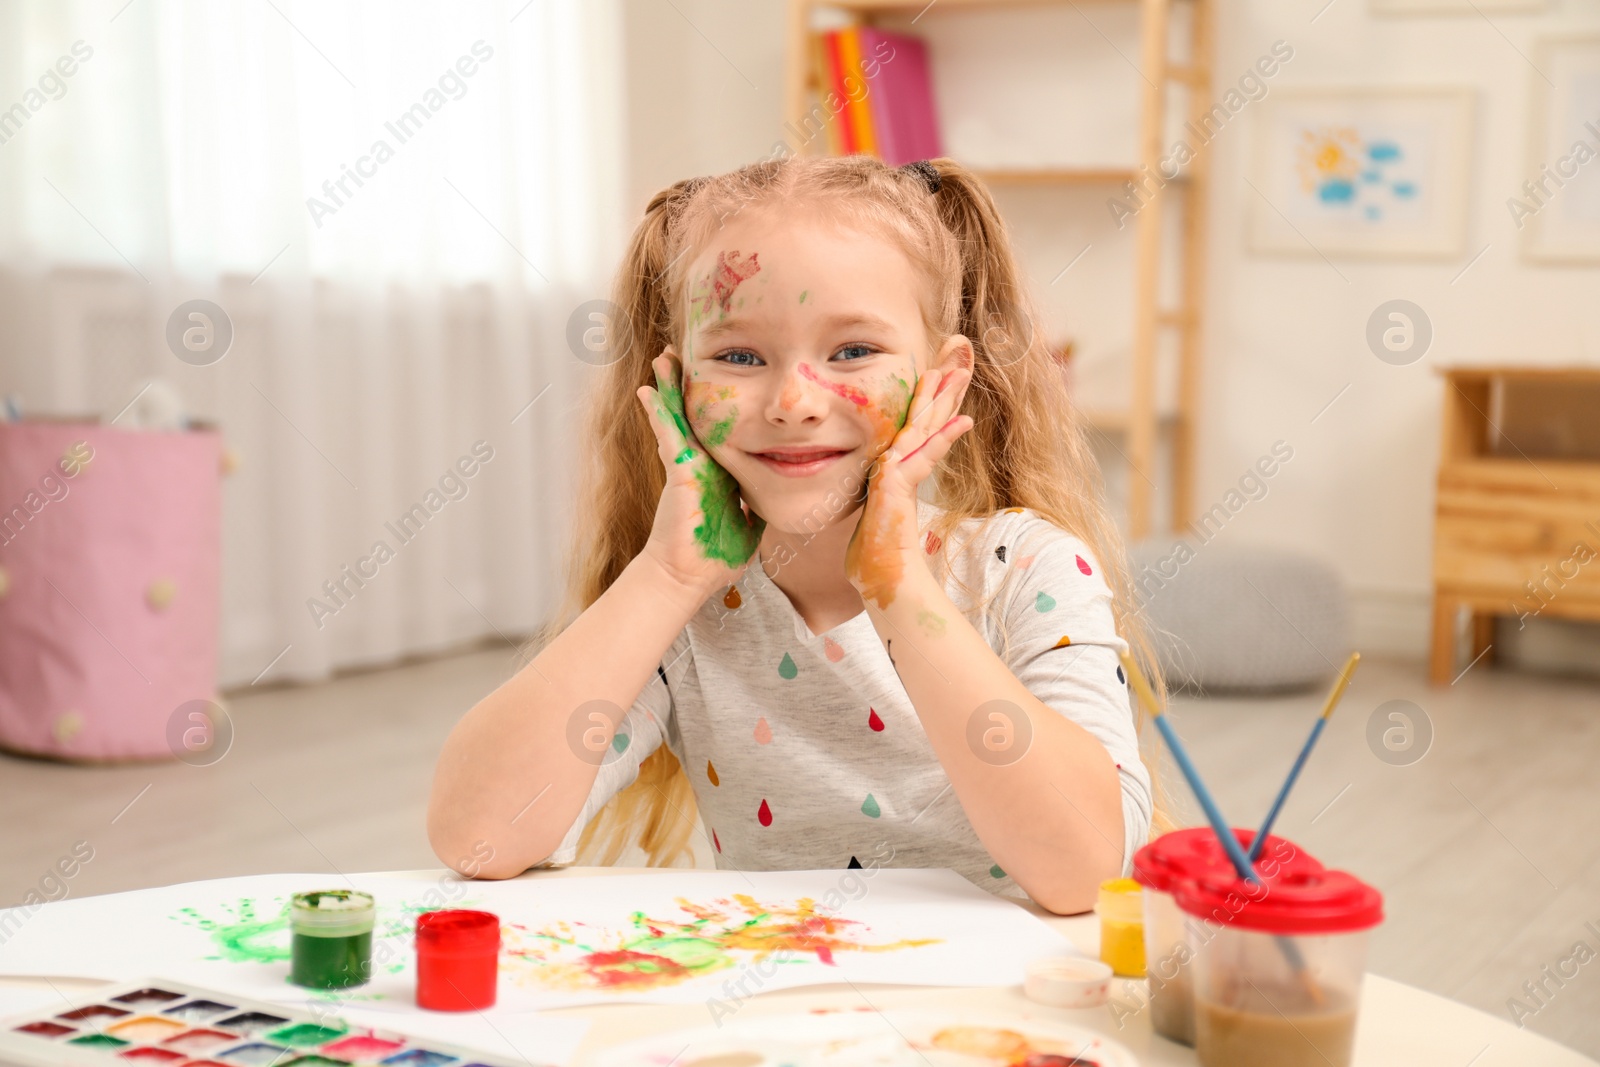 Photo of Cute little child painting with palms at table